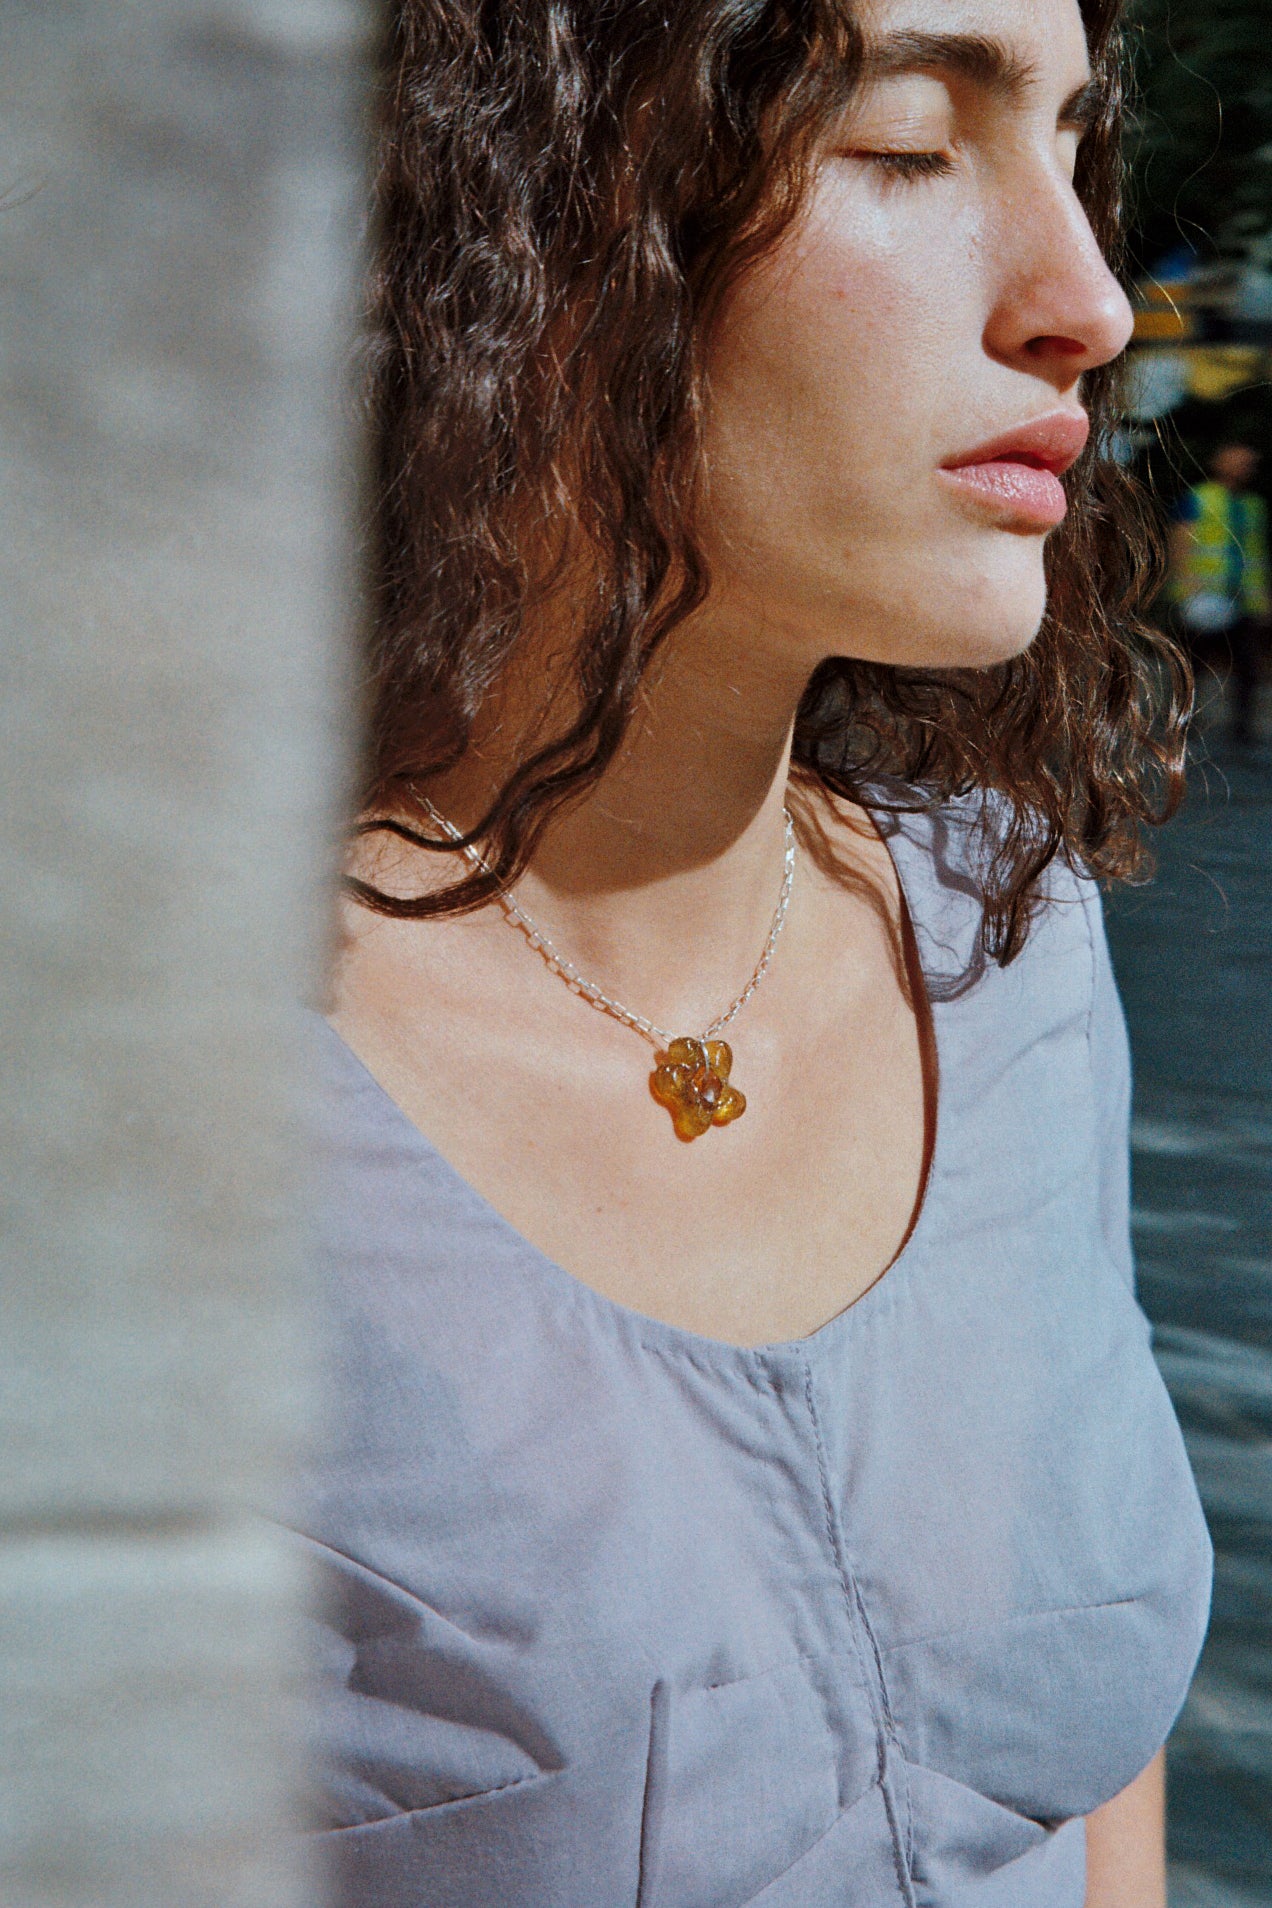 Le Caire necklace - Yellow